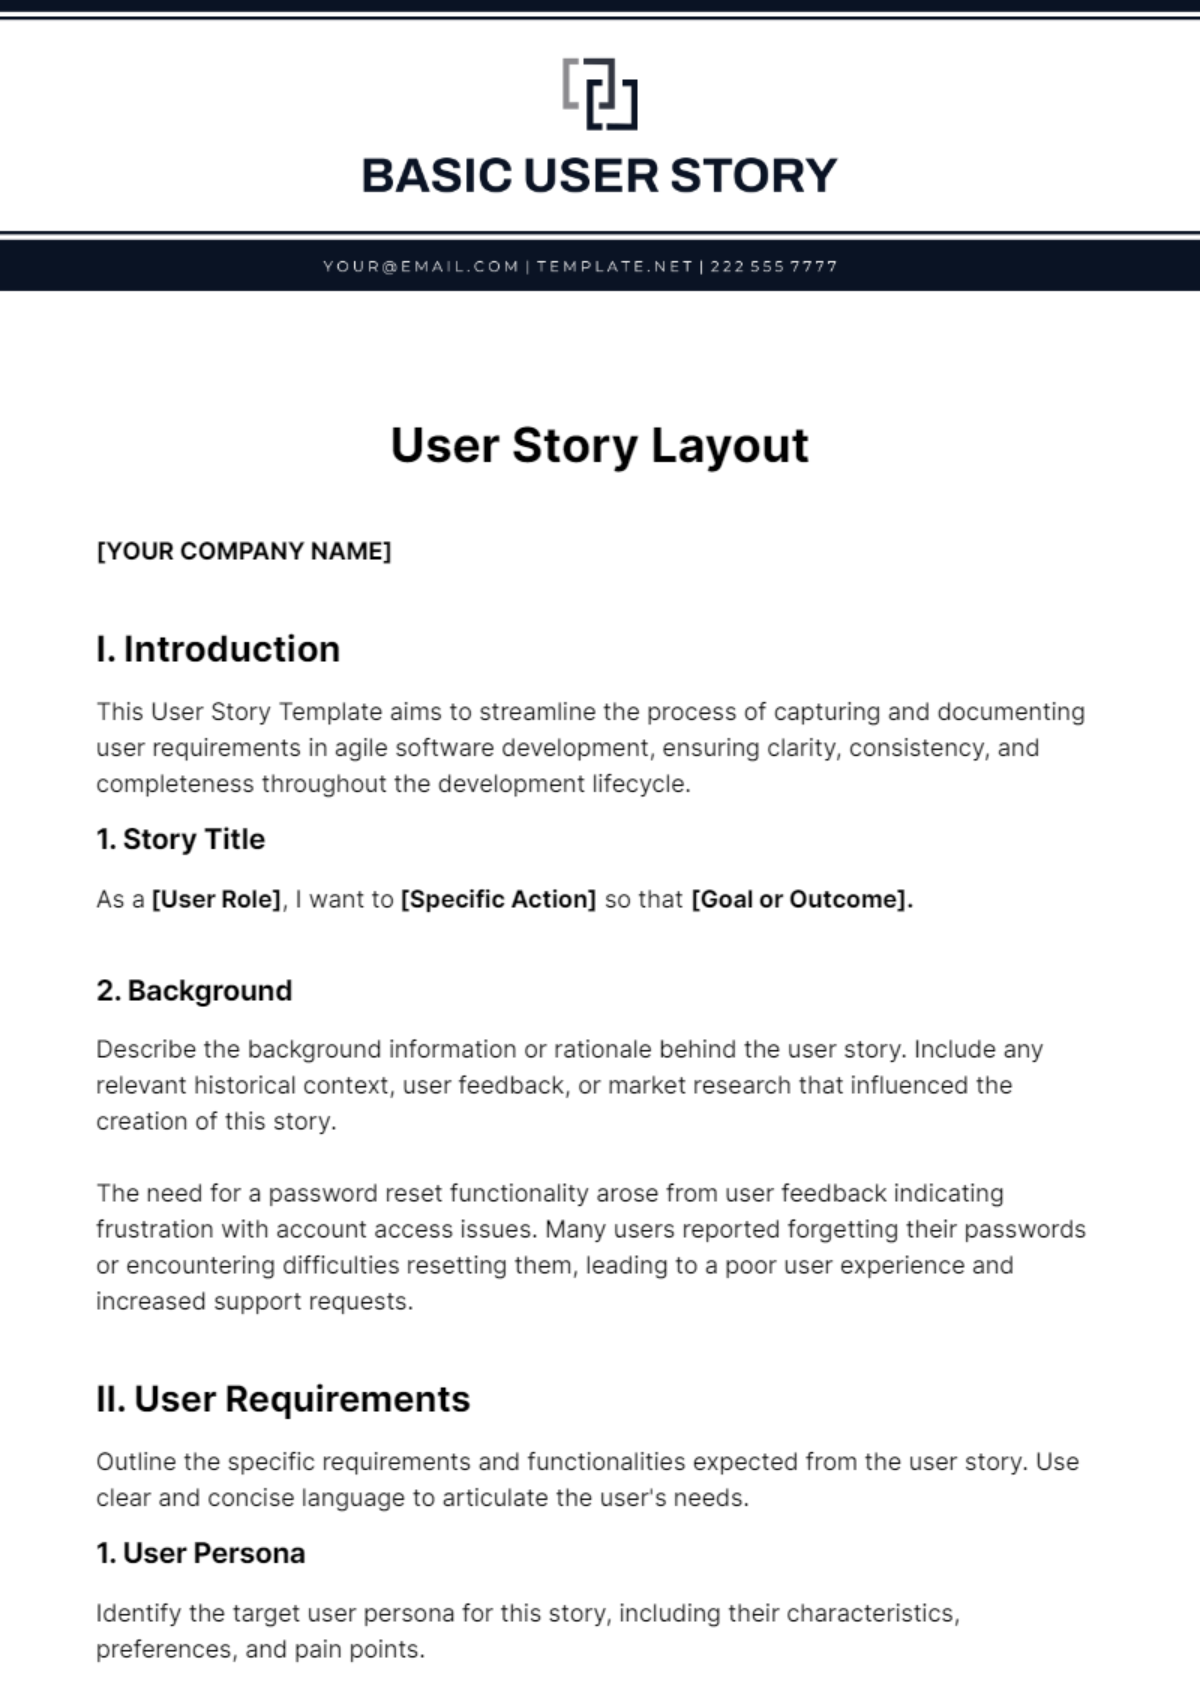 User Story Layout Template